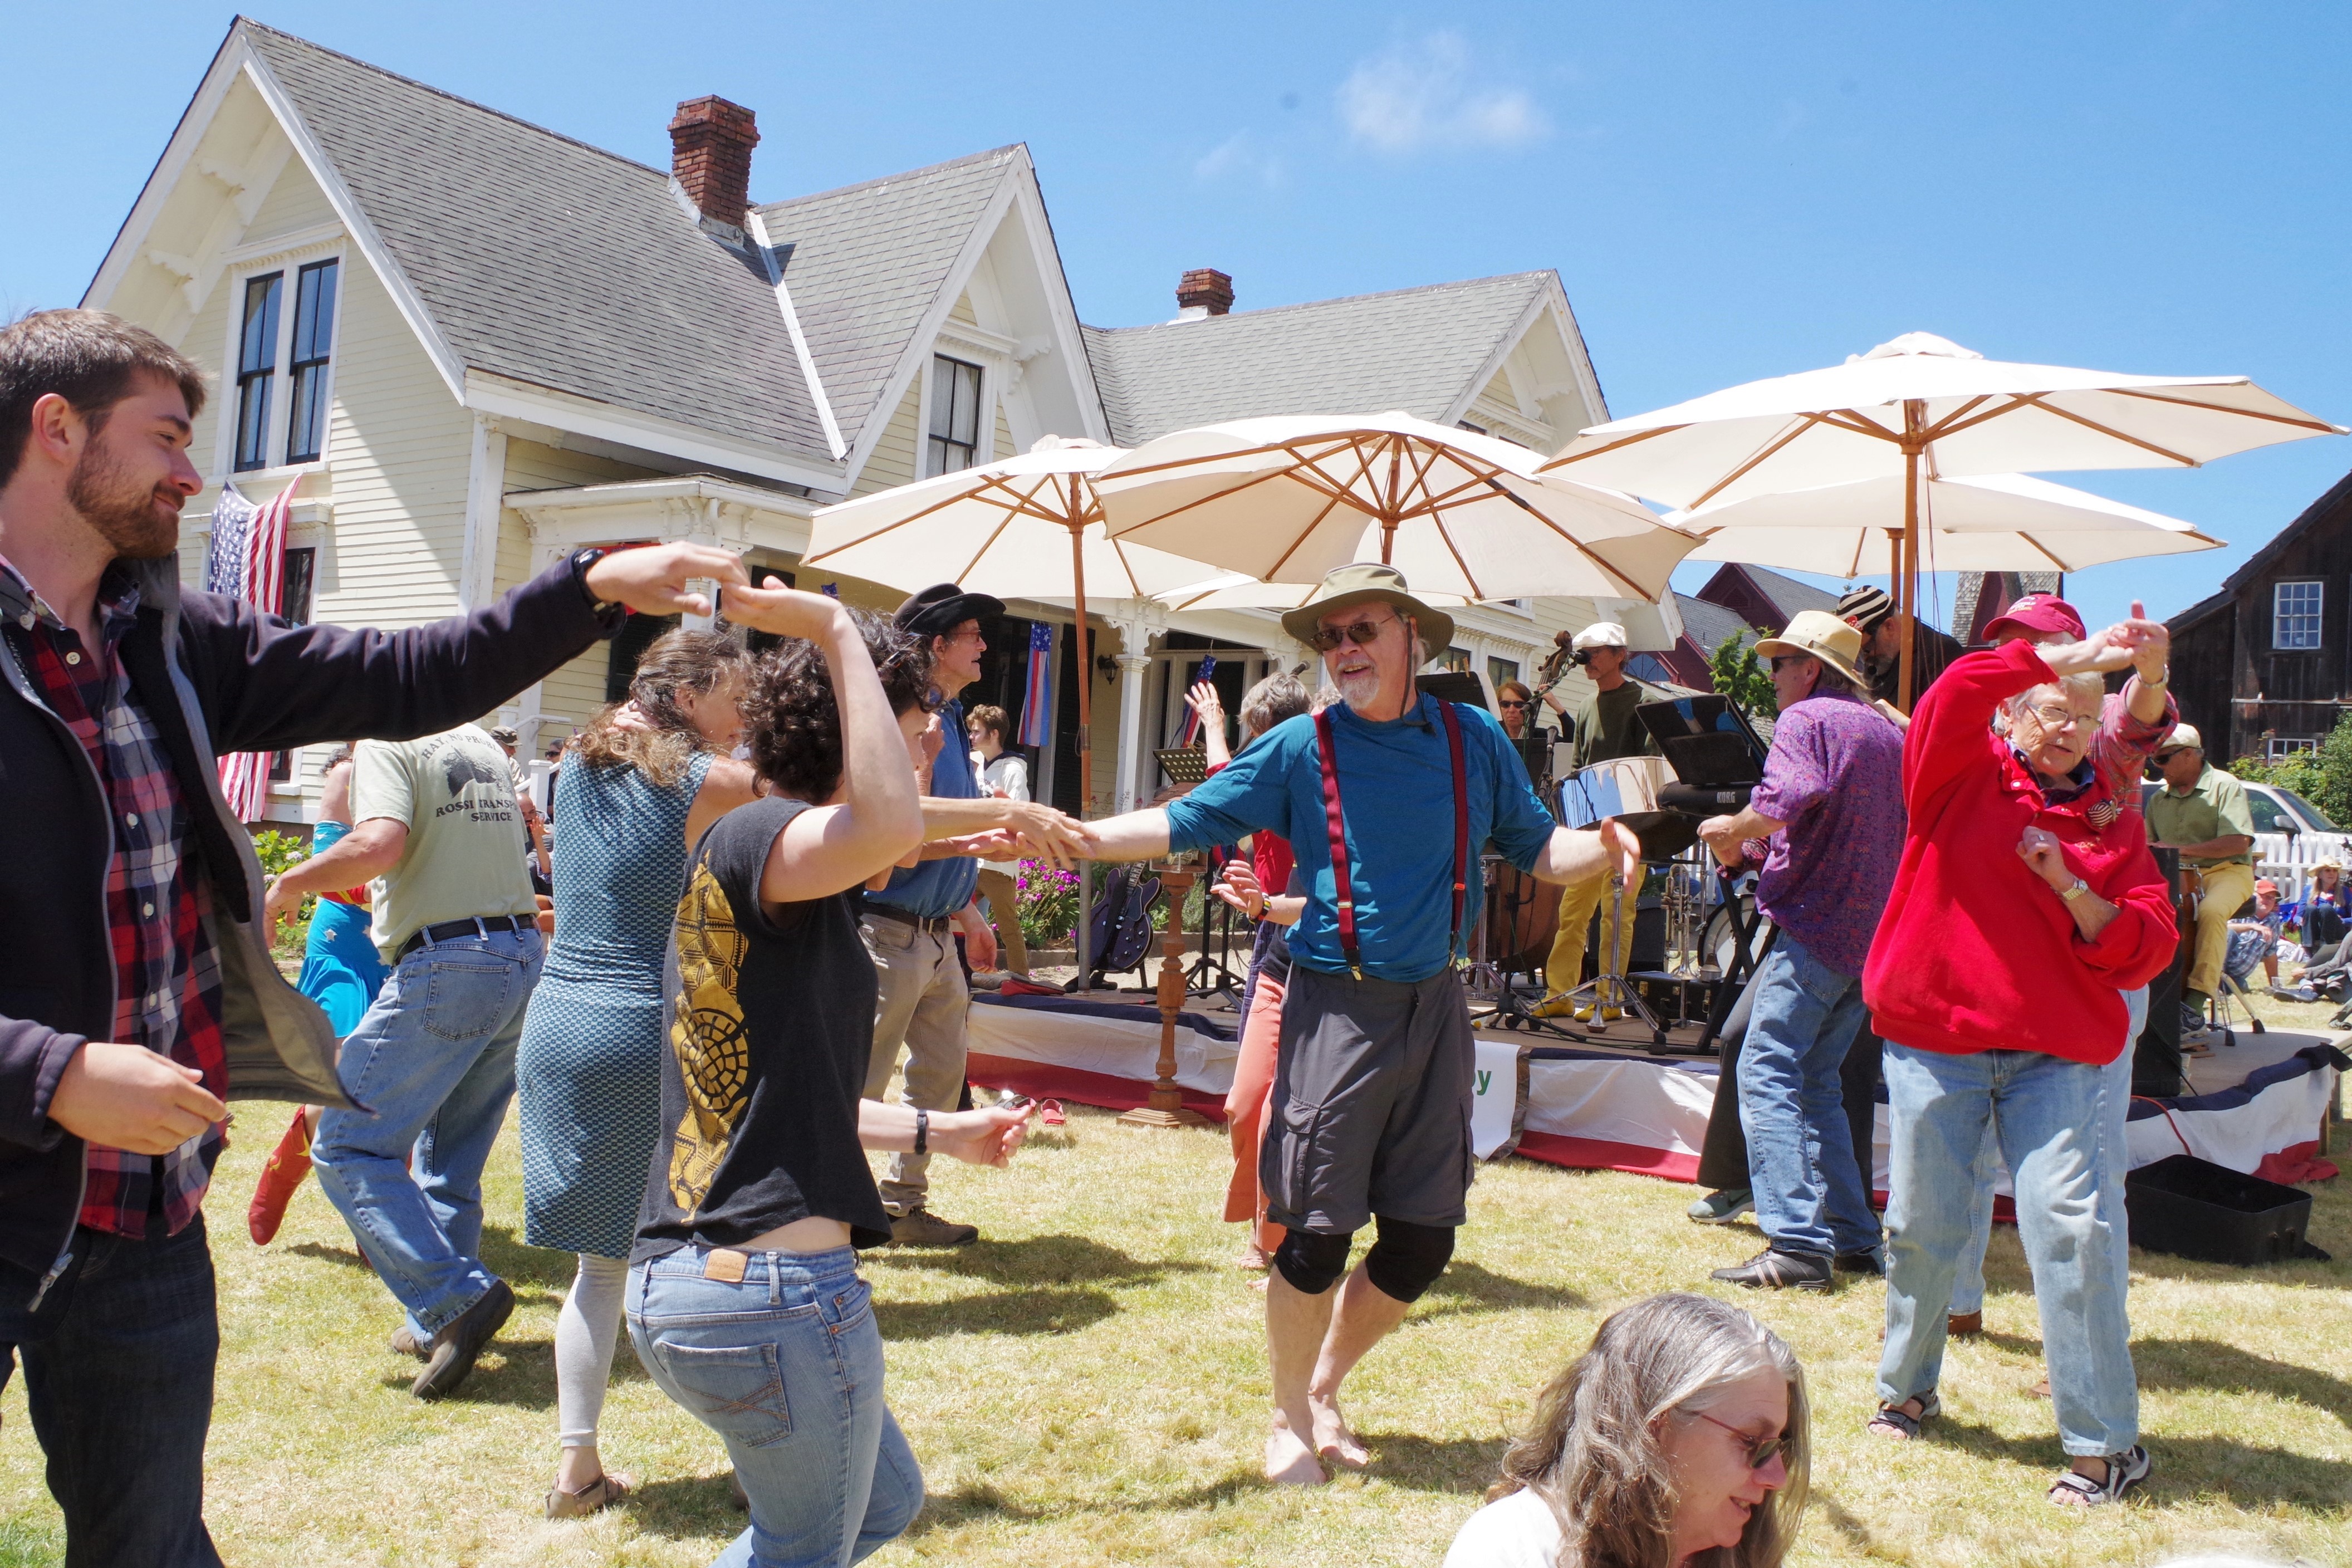 People dancing in front of a house with umbrellas and tables behind them